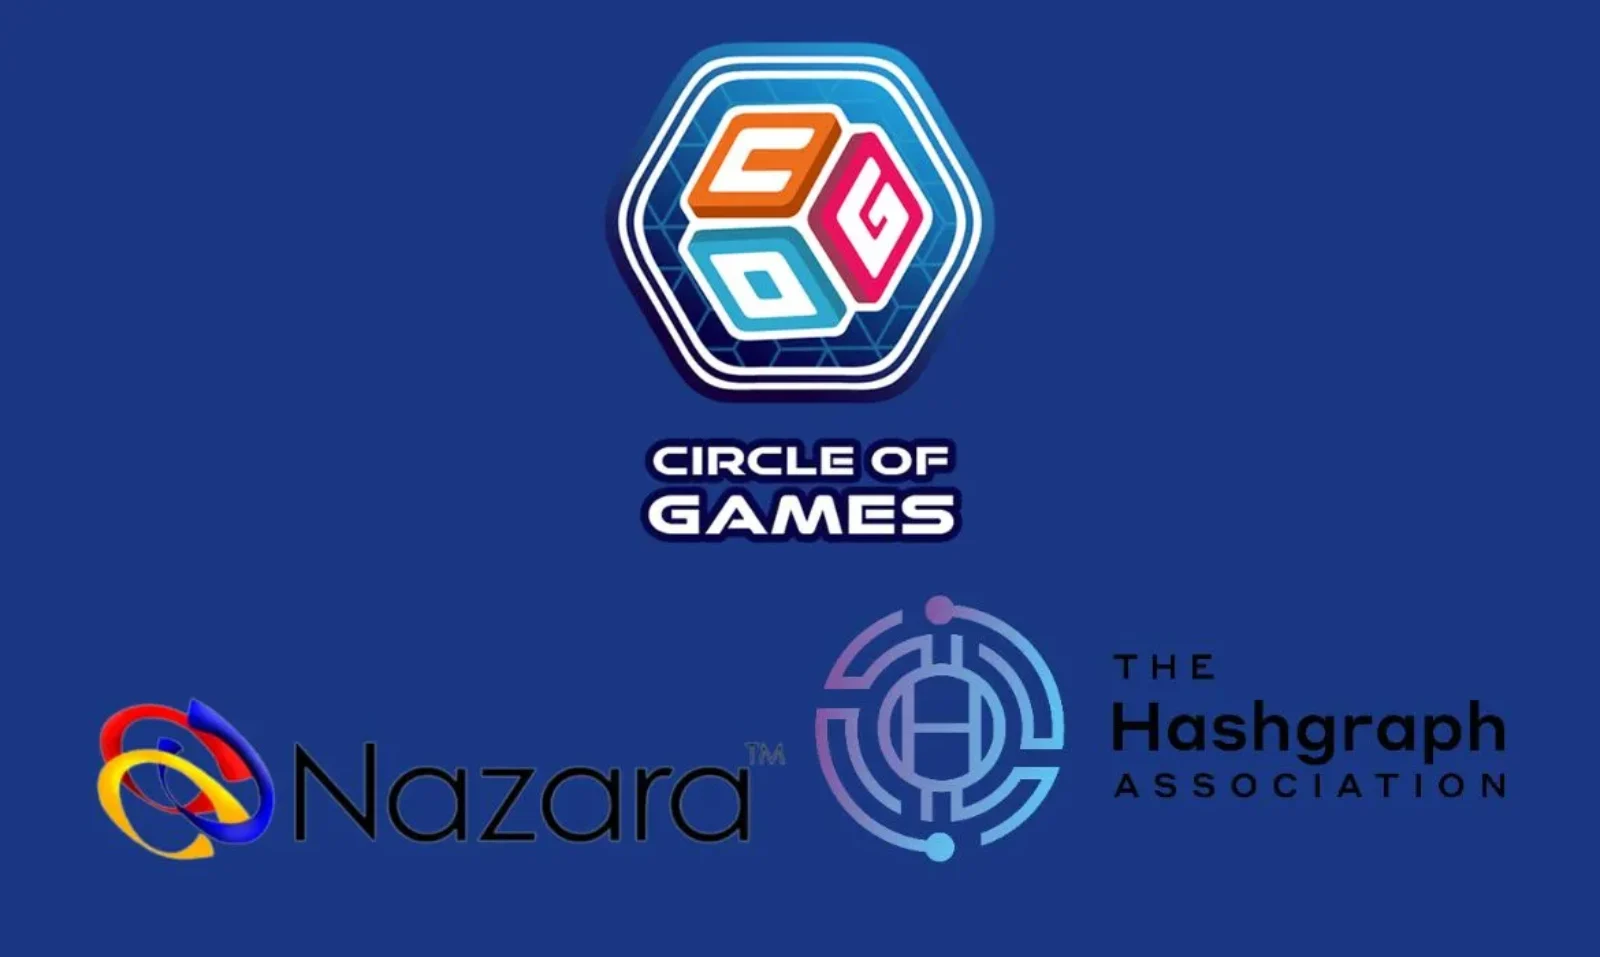 Gaming platform, gaming, esports, equity funding, augmented reality, strategic investors, the hashgraph association, cybersecurity, nazara technologies, Web3, casual gaming, funding, COG, circle of games, multi-gaming, $1 Million, non-profit organizations, digital enablement, sports media, gaming studios, adtech, IP, artificial intelligence, AI, Middle East, market strategy, hyper-casual gaming, blockchain, main net, on-chain transactions, skill-based games, DIN, Distribution Infrastructure Network, monetization, gaming content,